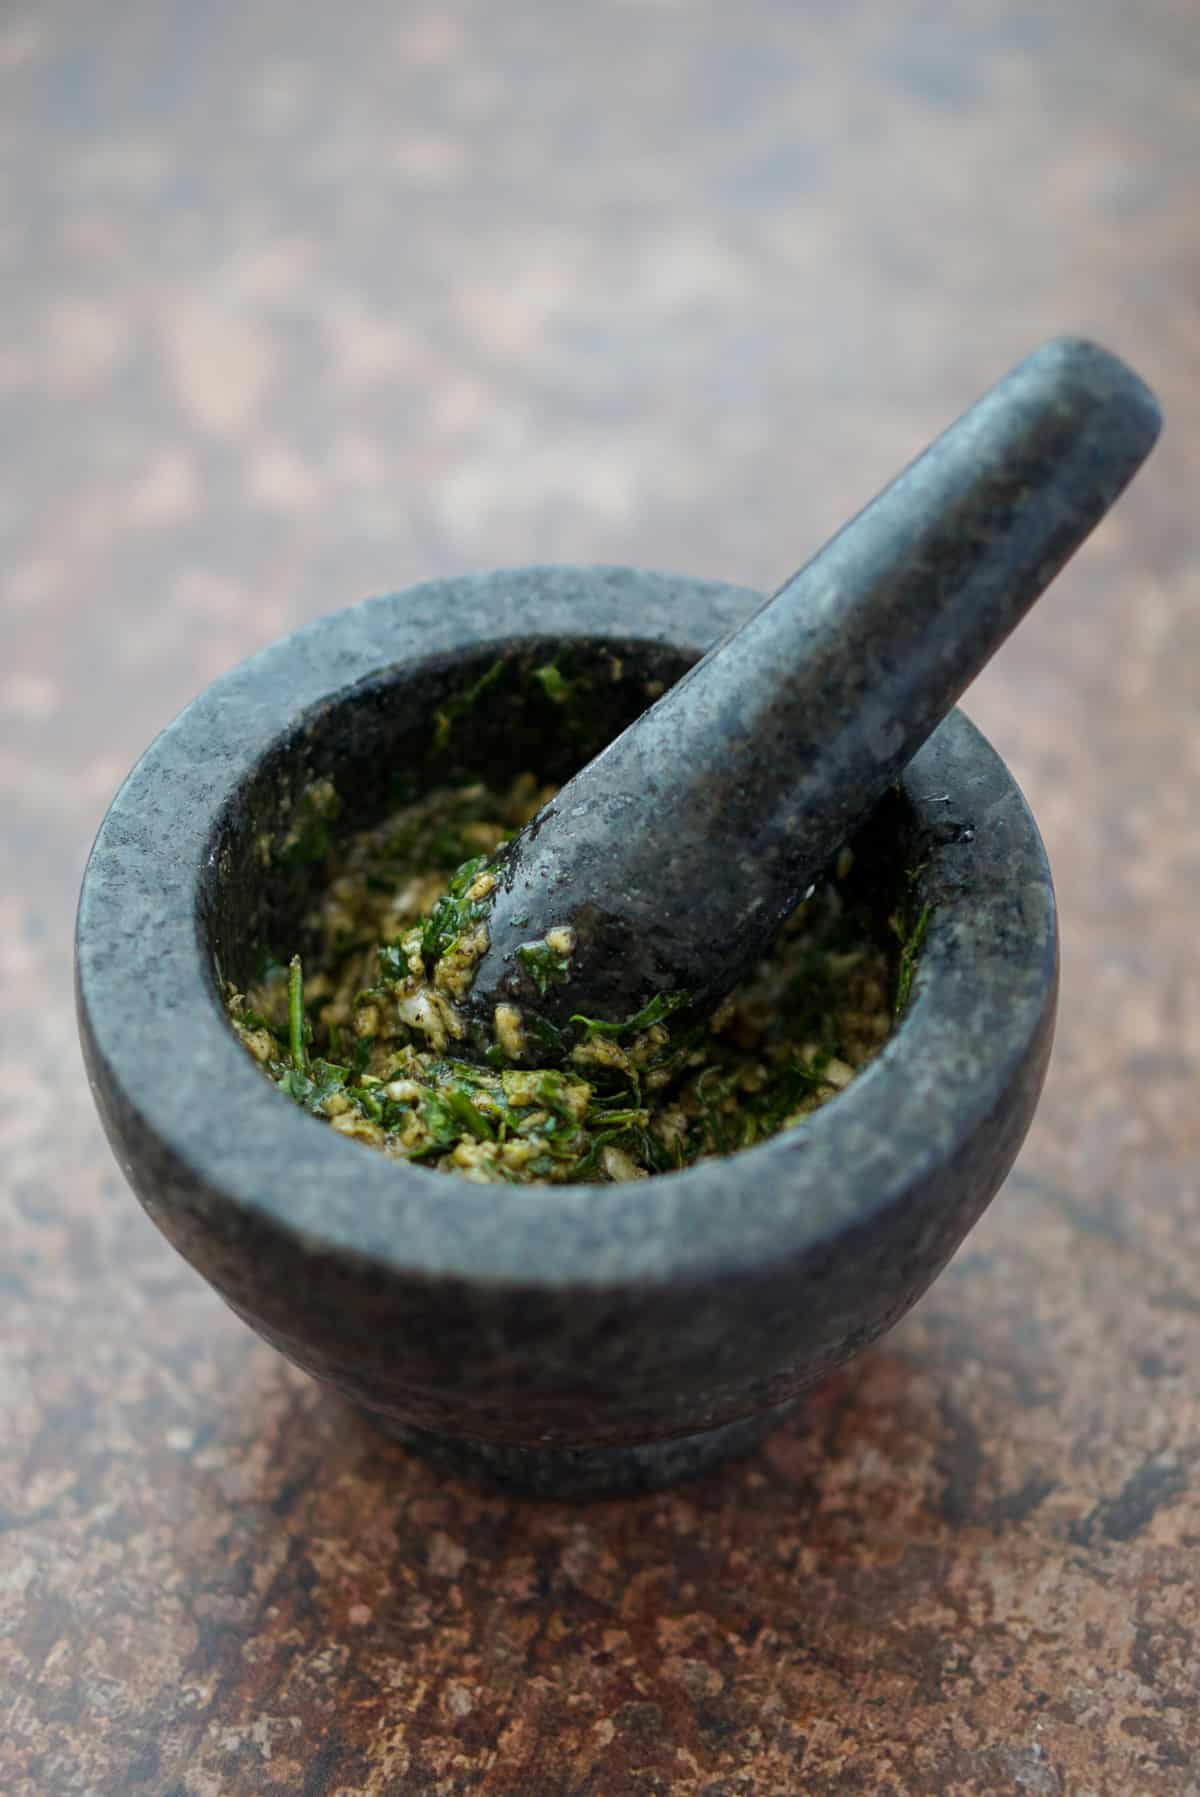 Mortar and pestle with garlic, salt, pepper, and parsley.